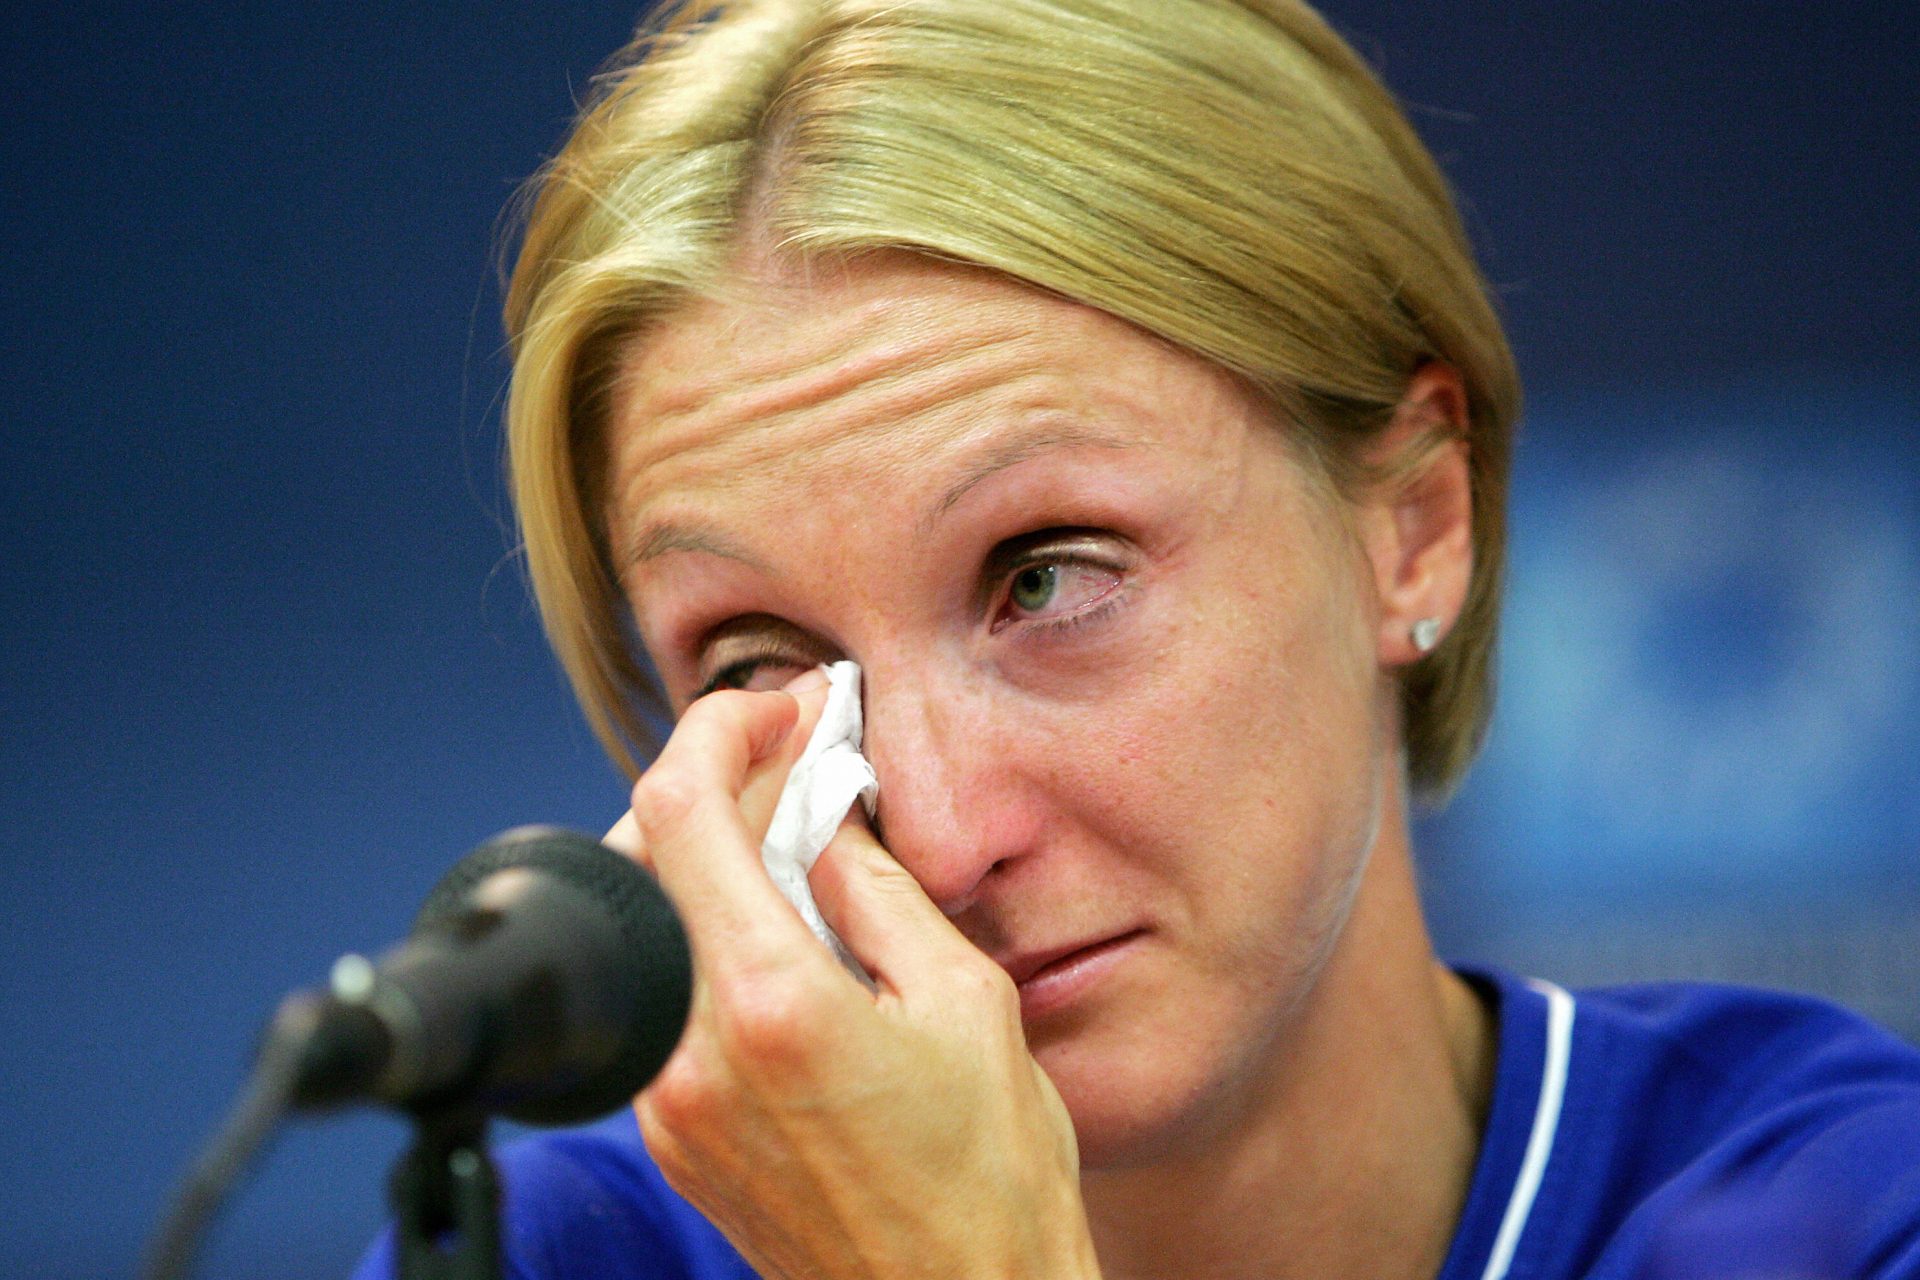 The most heartbreaking moments in Olympic Games history